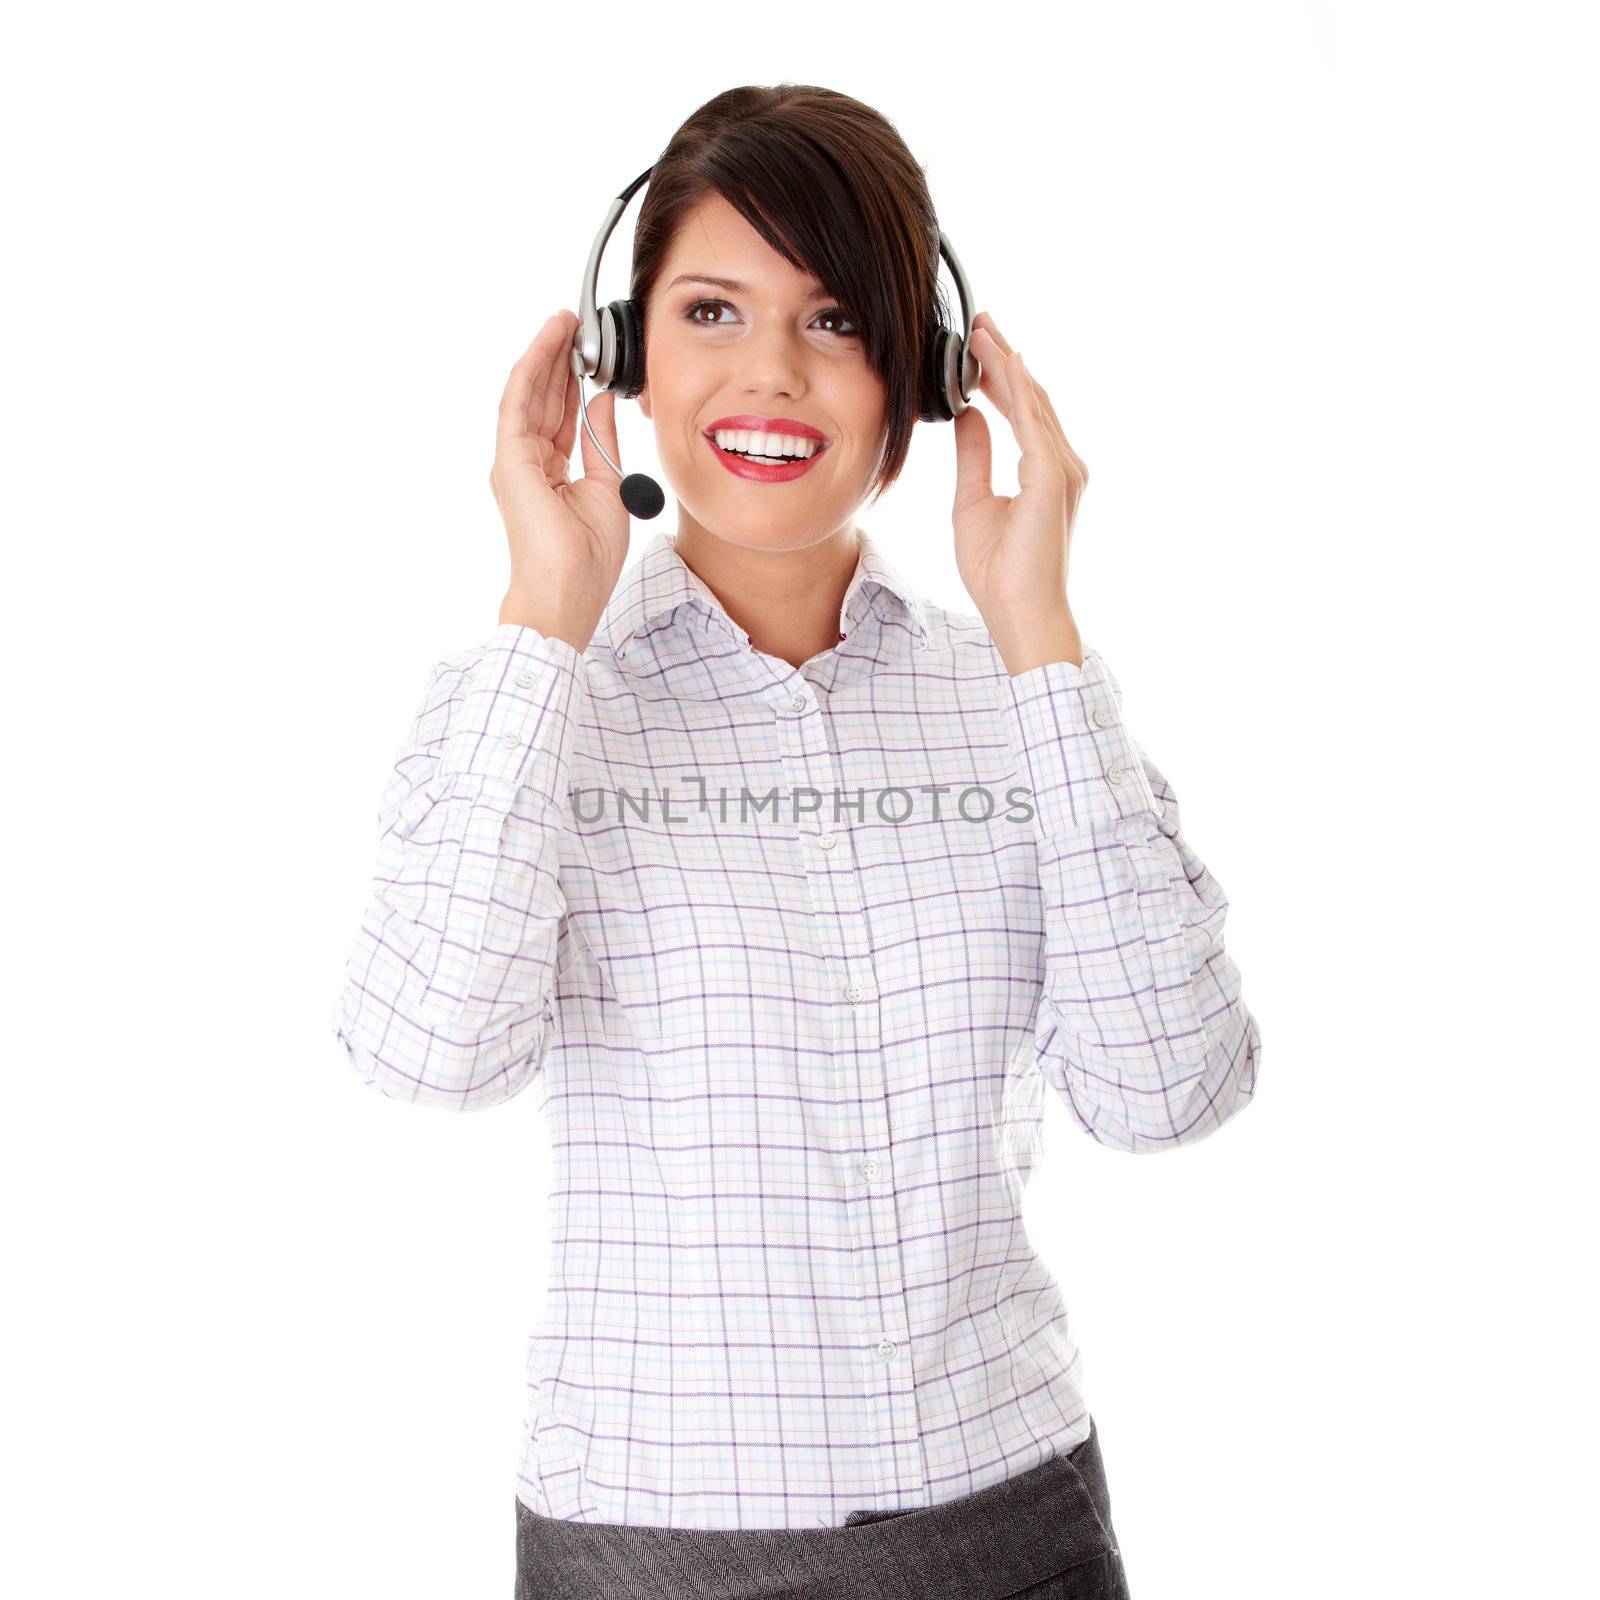 Call center woman with headset.